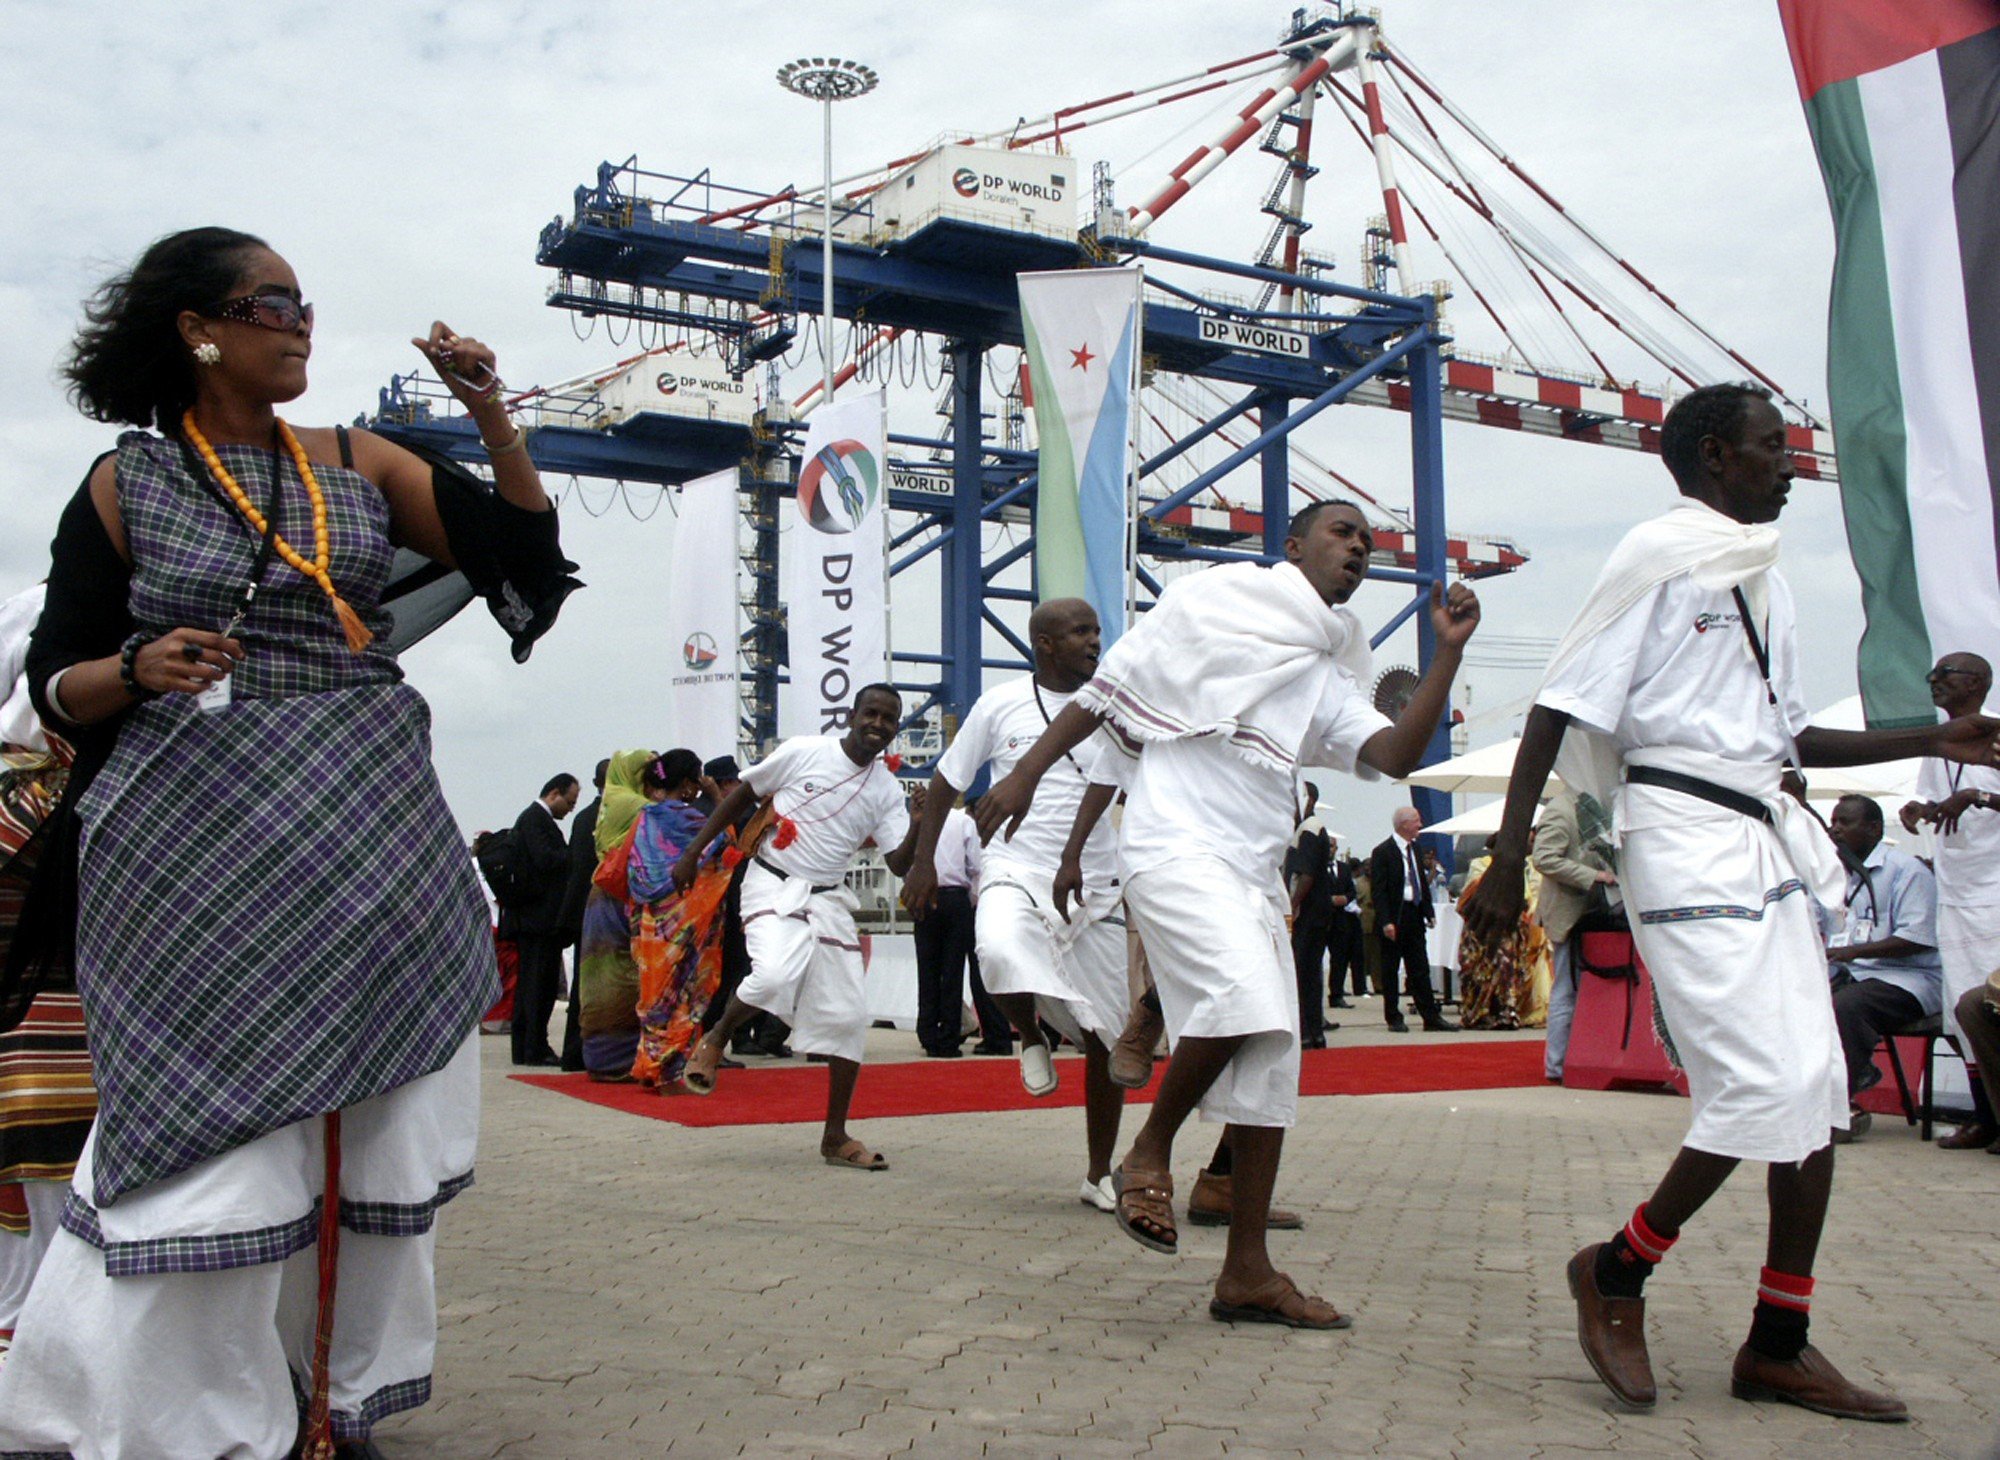 Performers dance during the opening ceremony of Dubai-based port operator DP World’s Doraleh container terminal in Djibouti port. Djibouti’s president has been criticised for seizing control of the terminal, reportedly to allow China to take it over. China has been investing heavily in the African port nation and set up a naval base there. Photo: AP